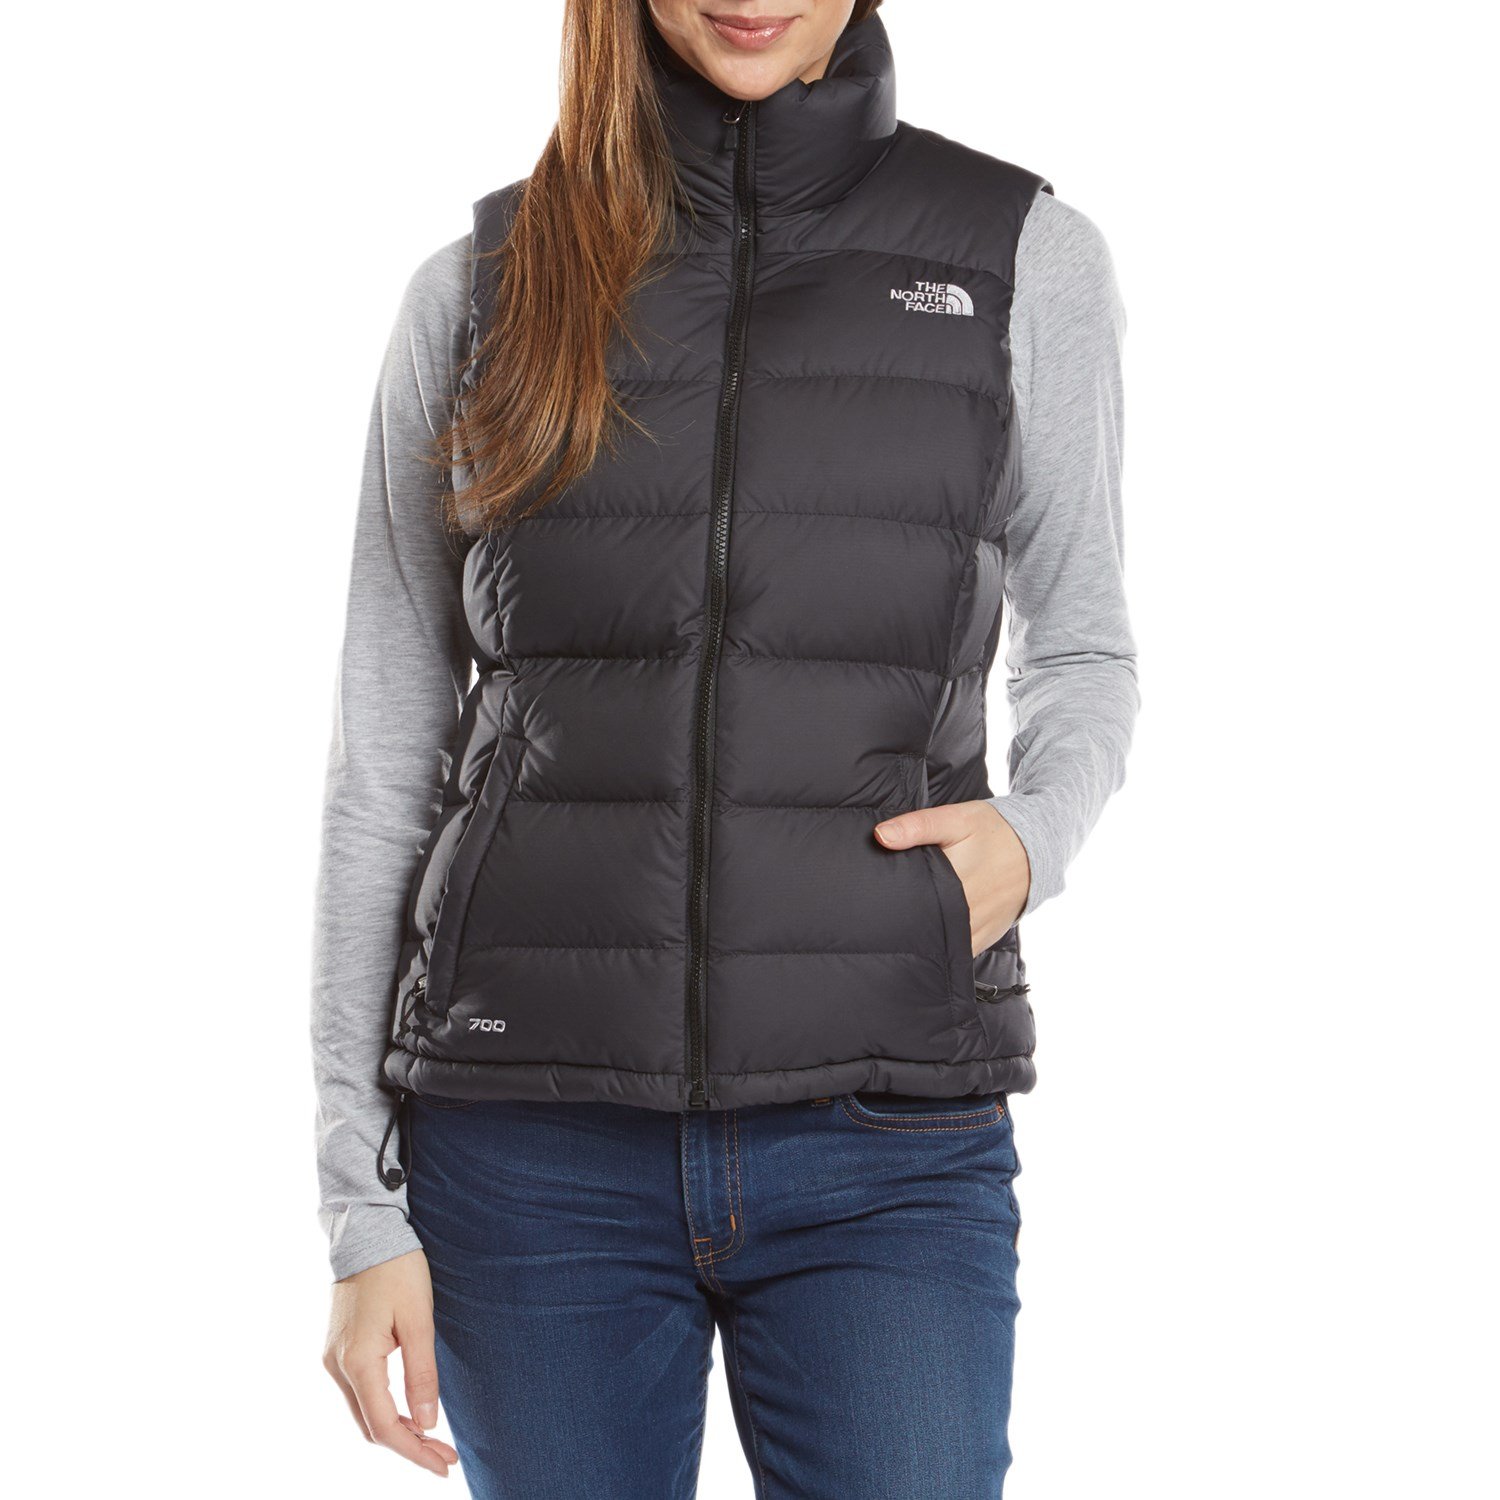 the north face body warmer womens